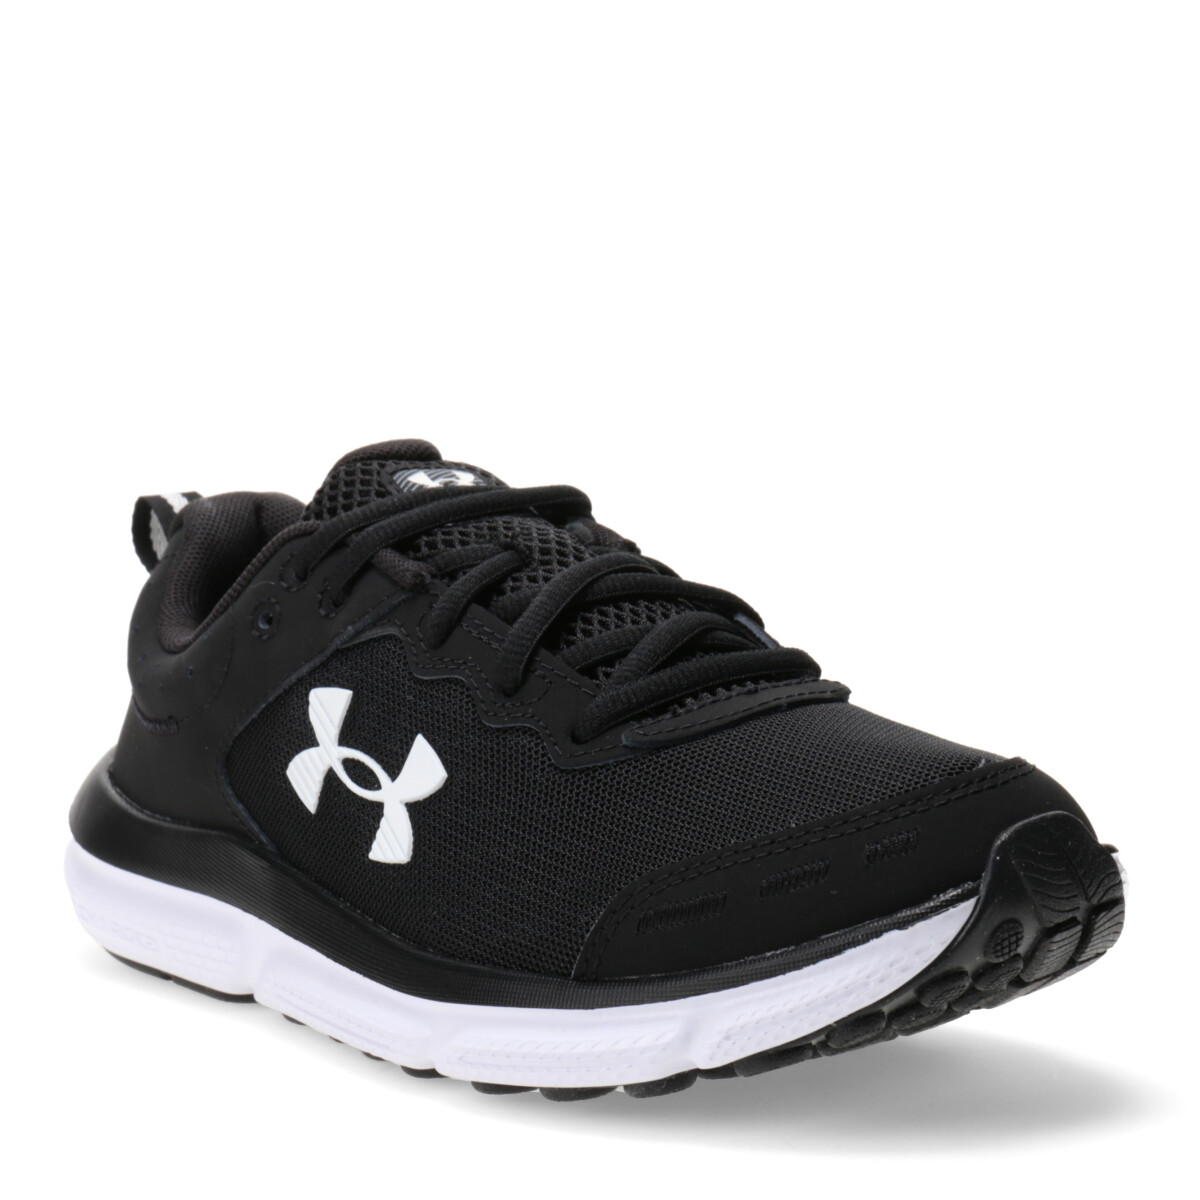 Championes de Mujer Under Armour Charged Assert 10 - Negro 